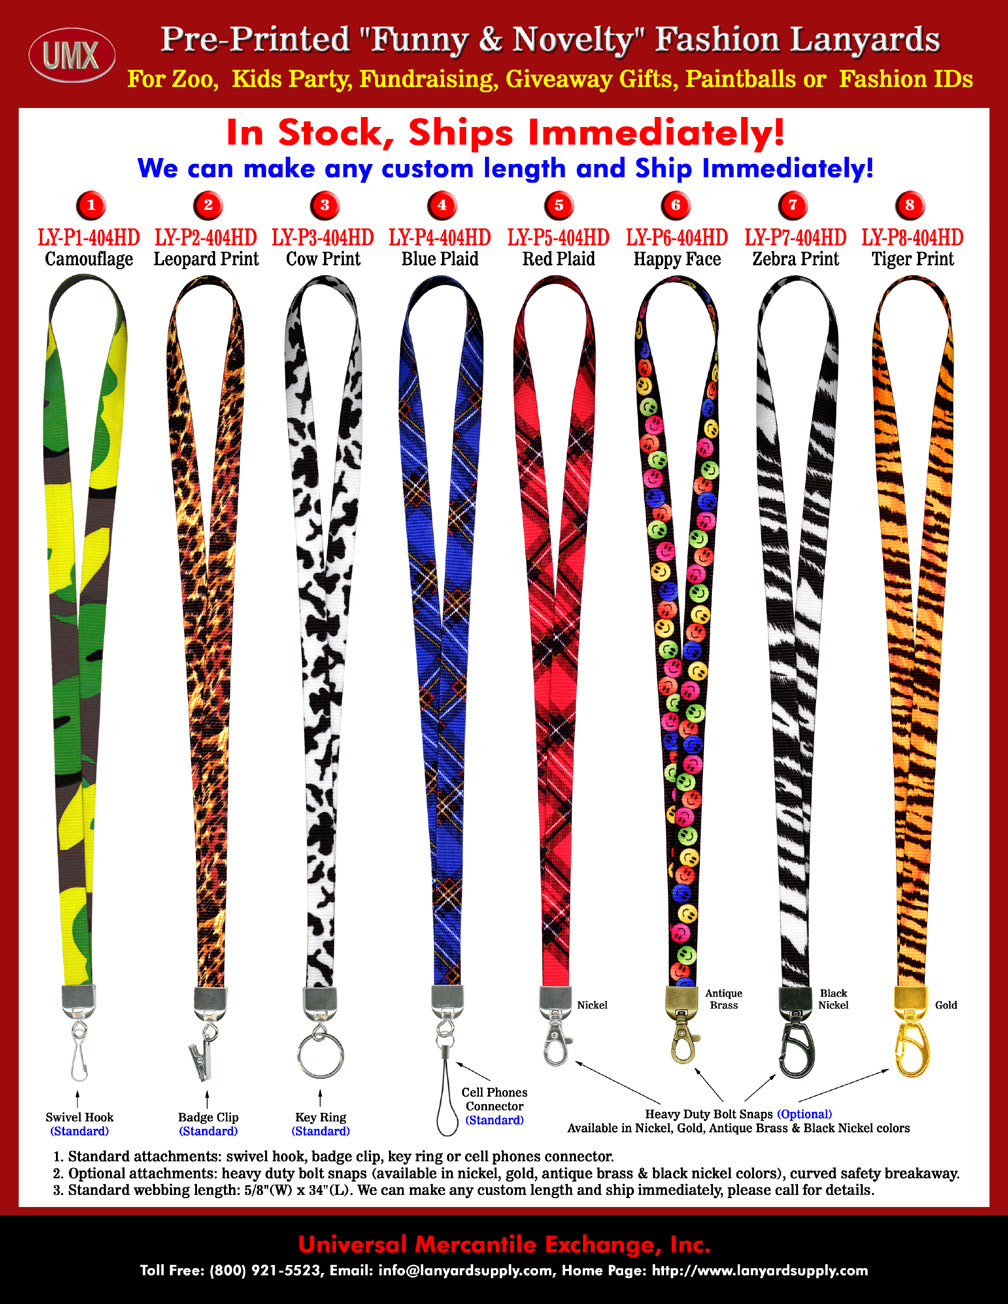 The cool USB lanyards or USB carrying straps are unique designs for carrying USB flash drives, flash cards, flash ports, memory cards, hard drives, computer electronics or digital music players.